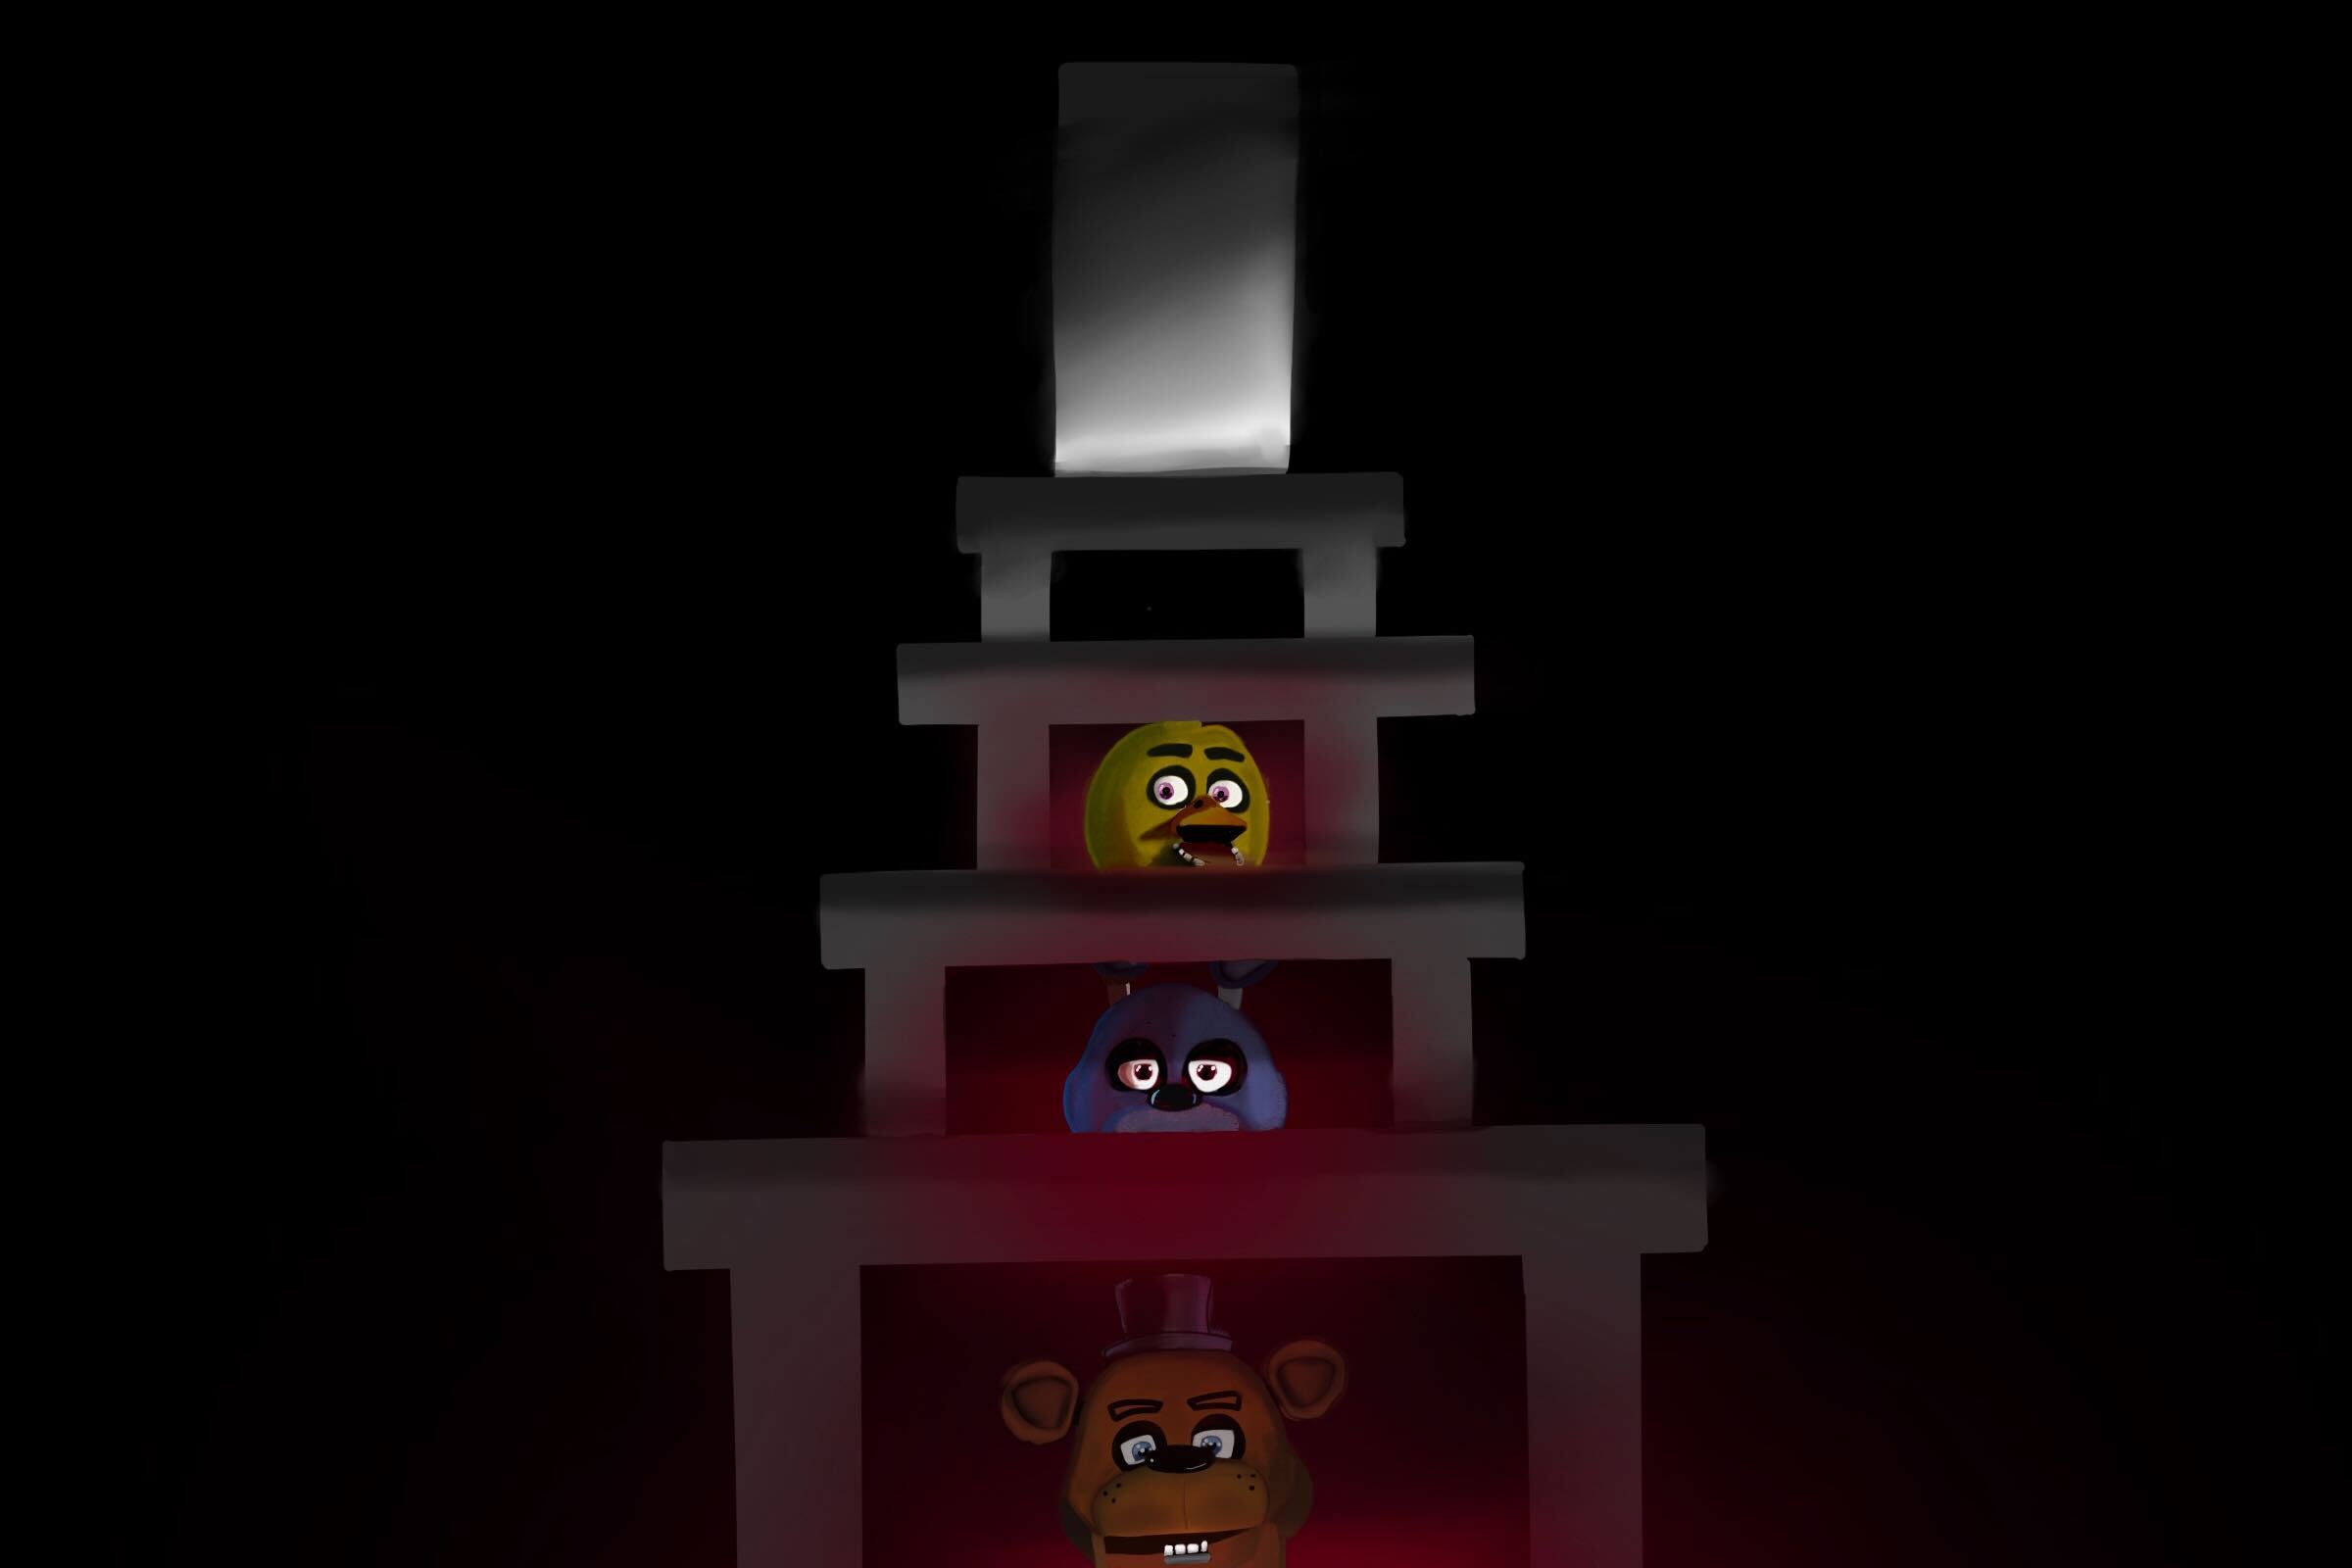 Everything The Five Nights At Freddy's Movie Changed From The Games